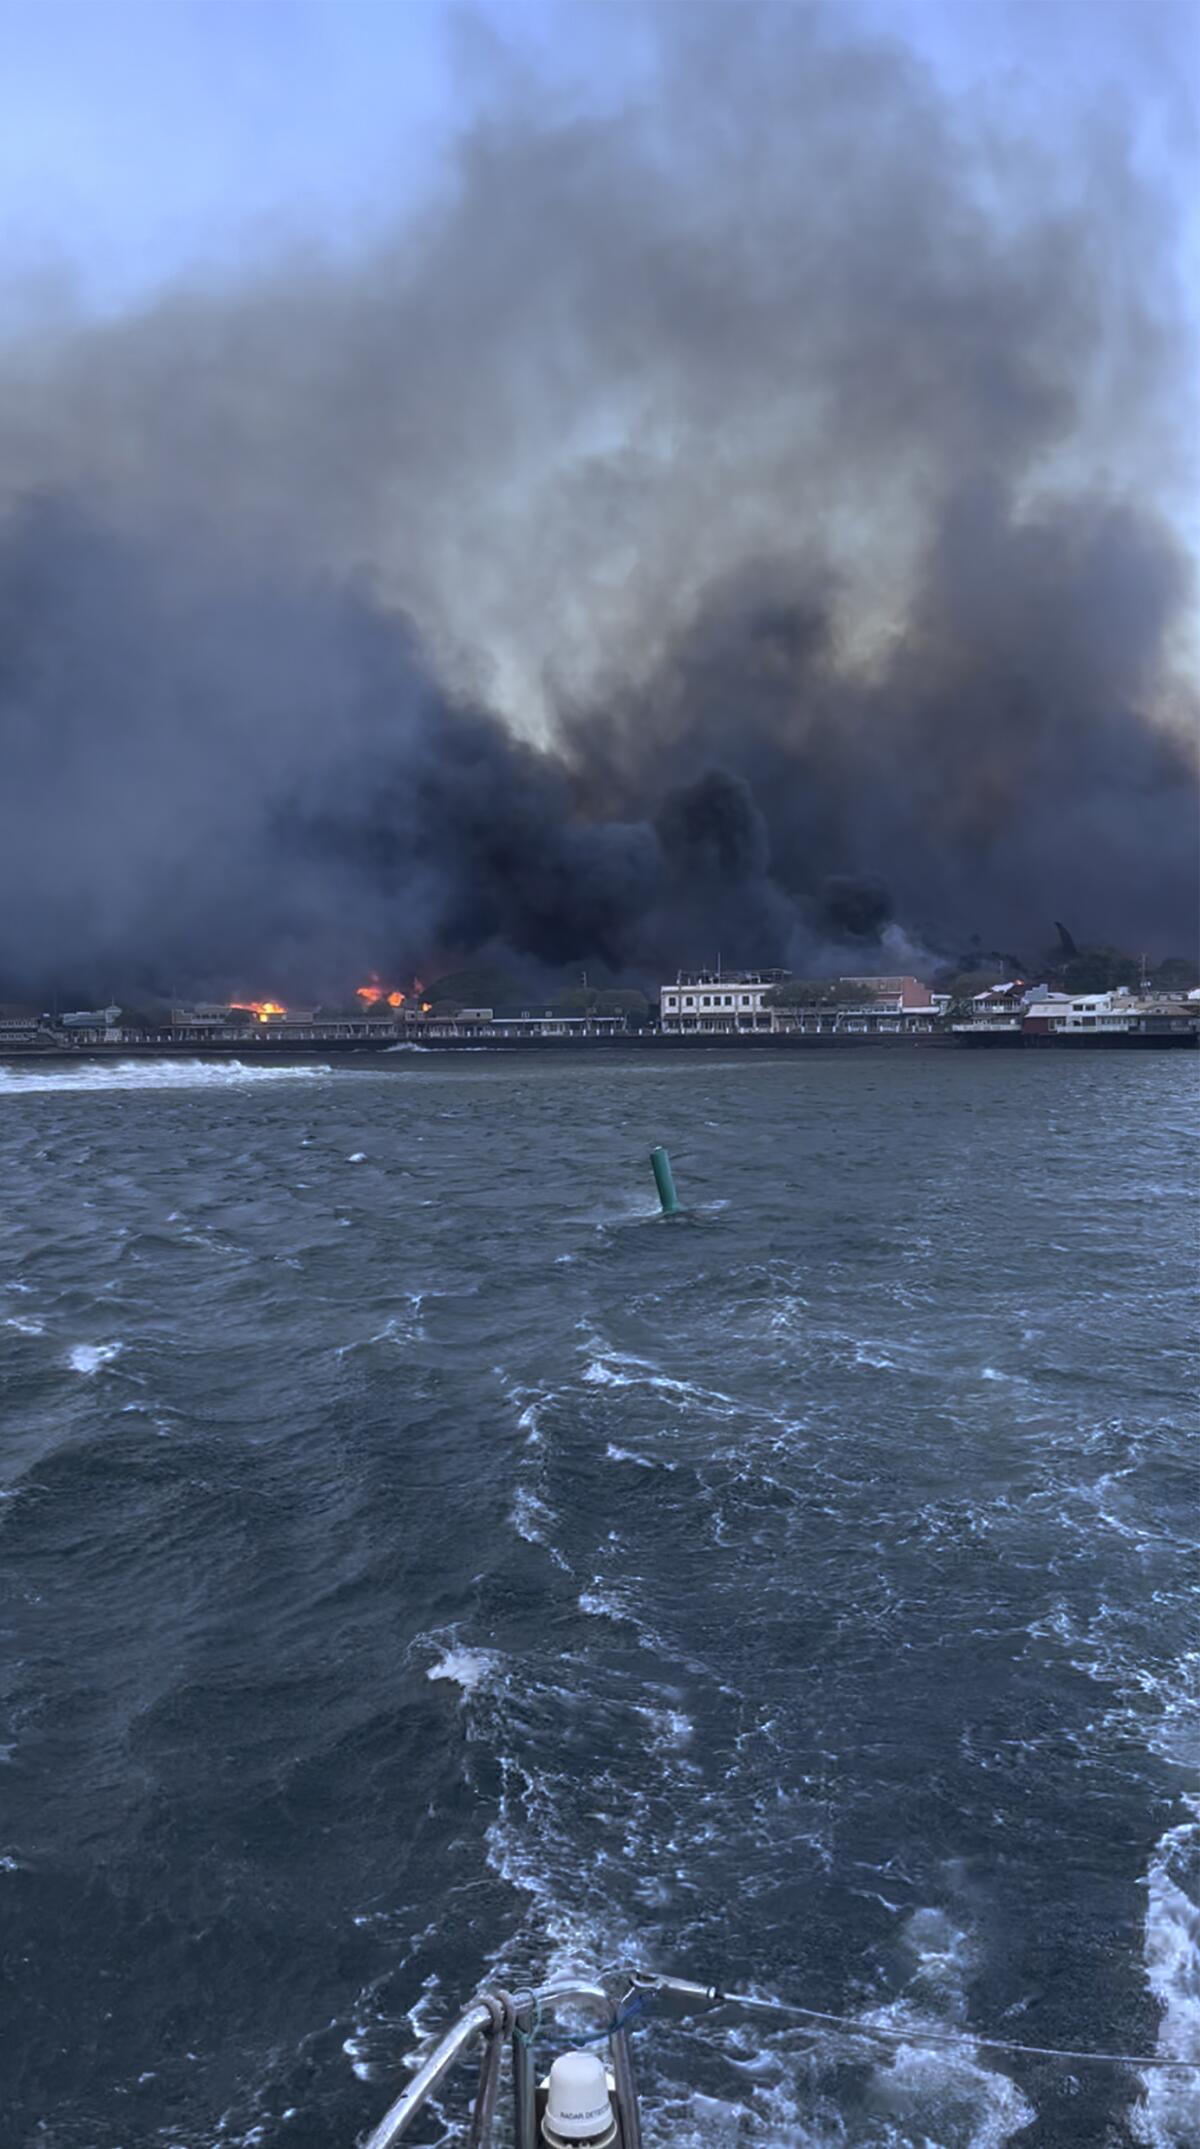 Smoke fills a harbor as seen from the water.